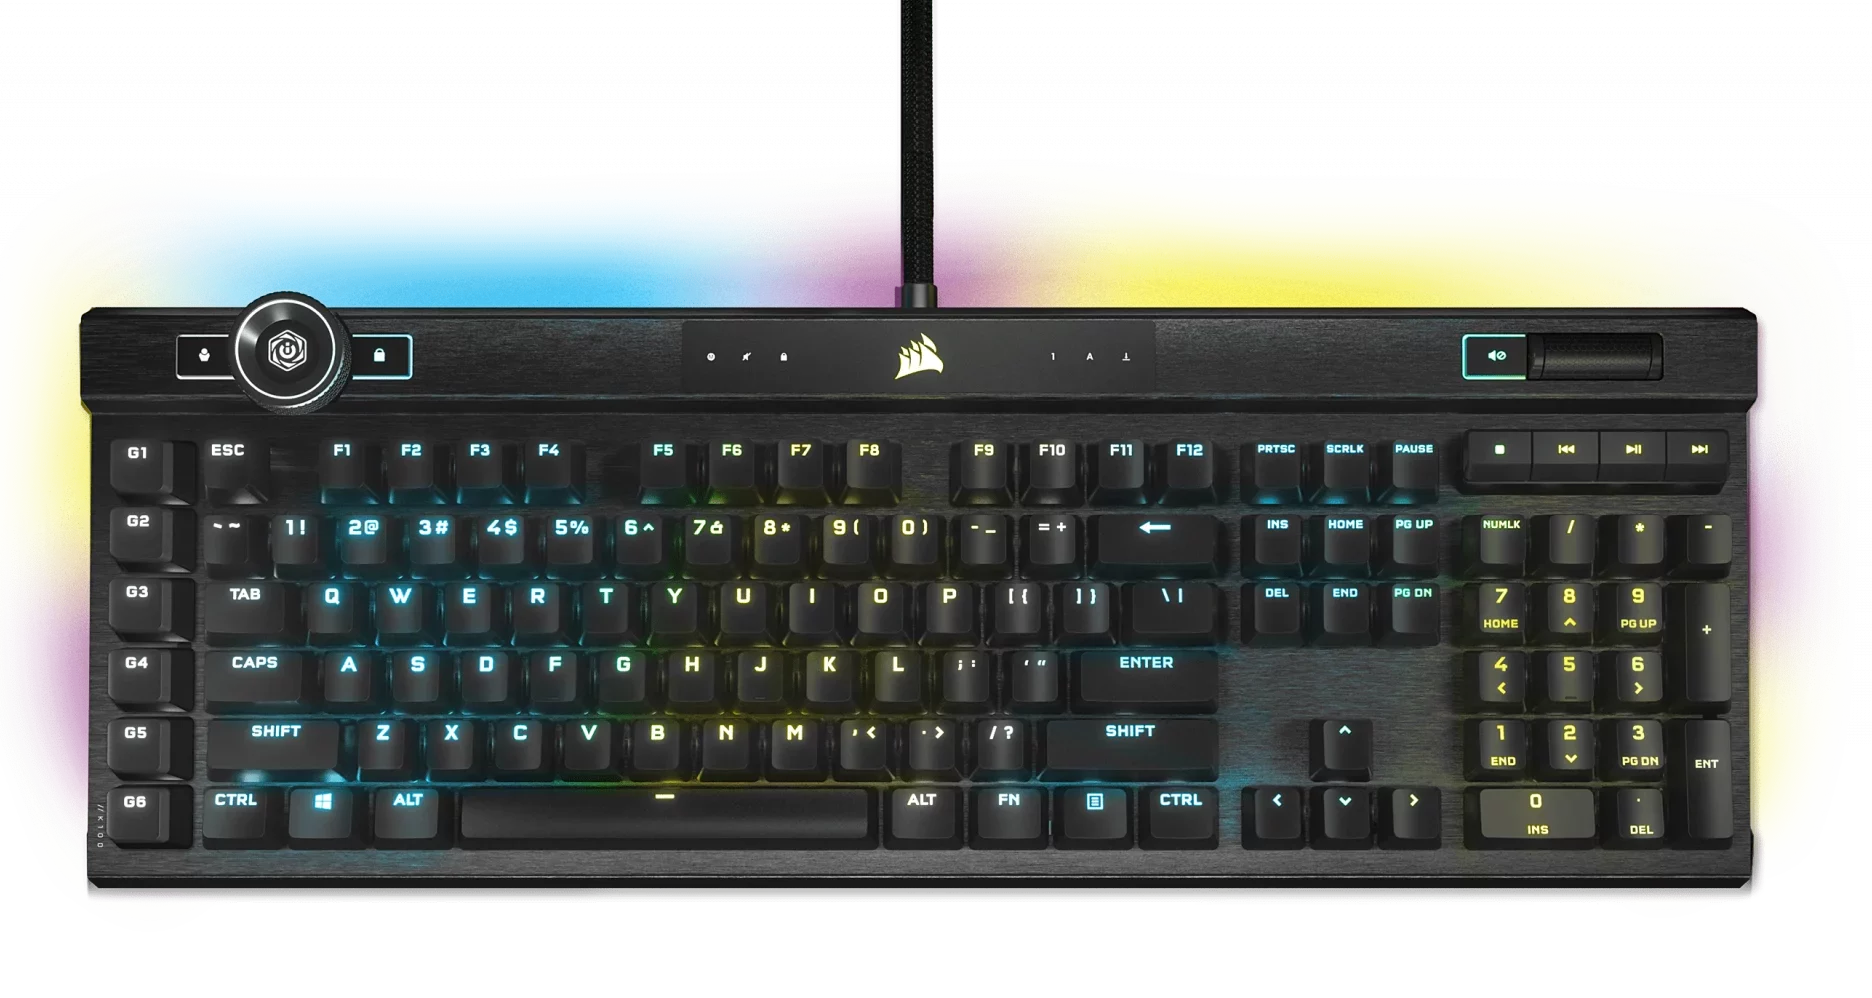 Corsair top of the range: the best brand peripherals for you to build your PC